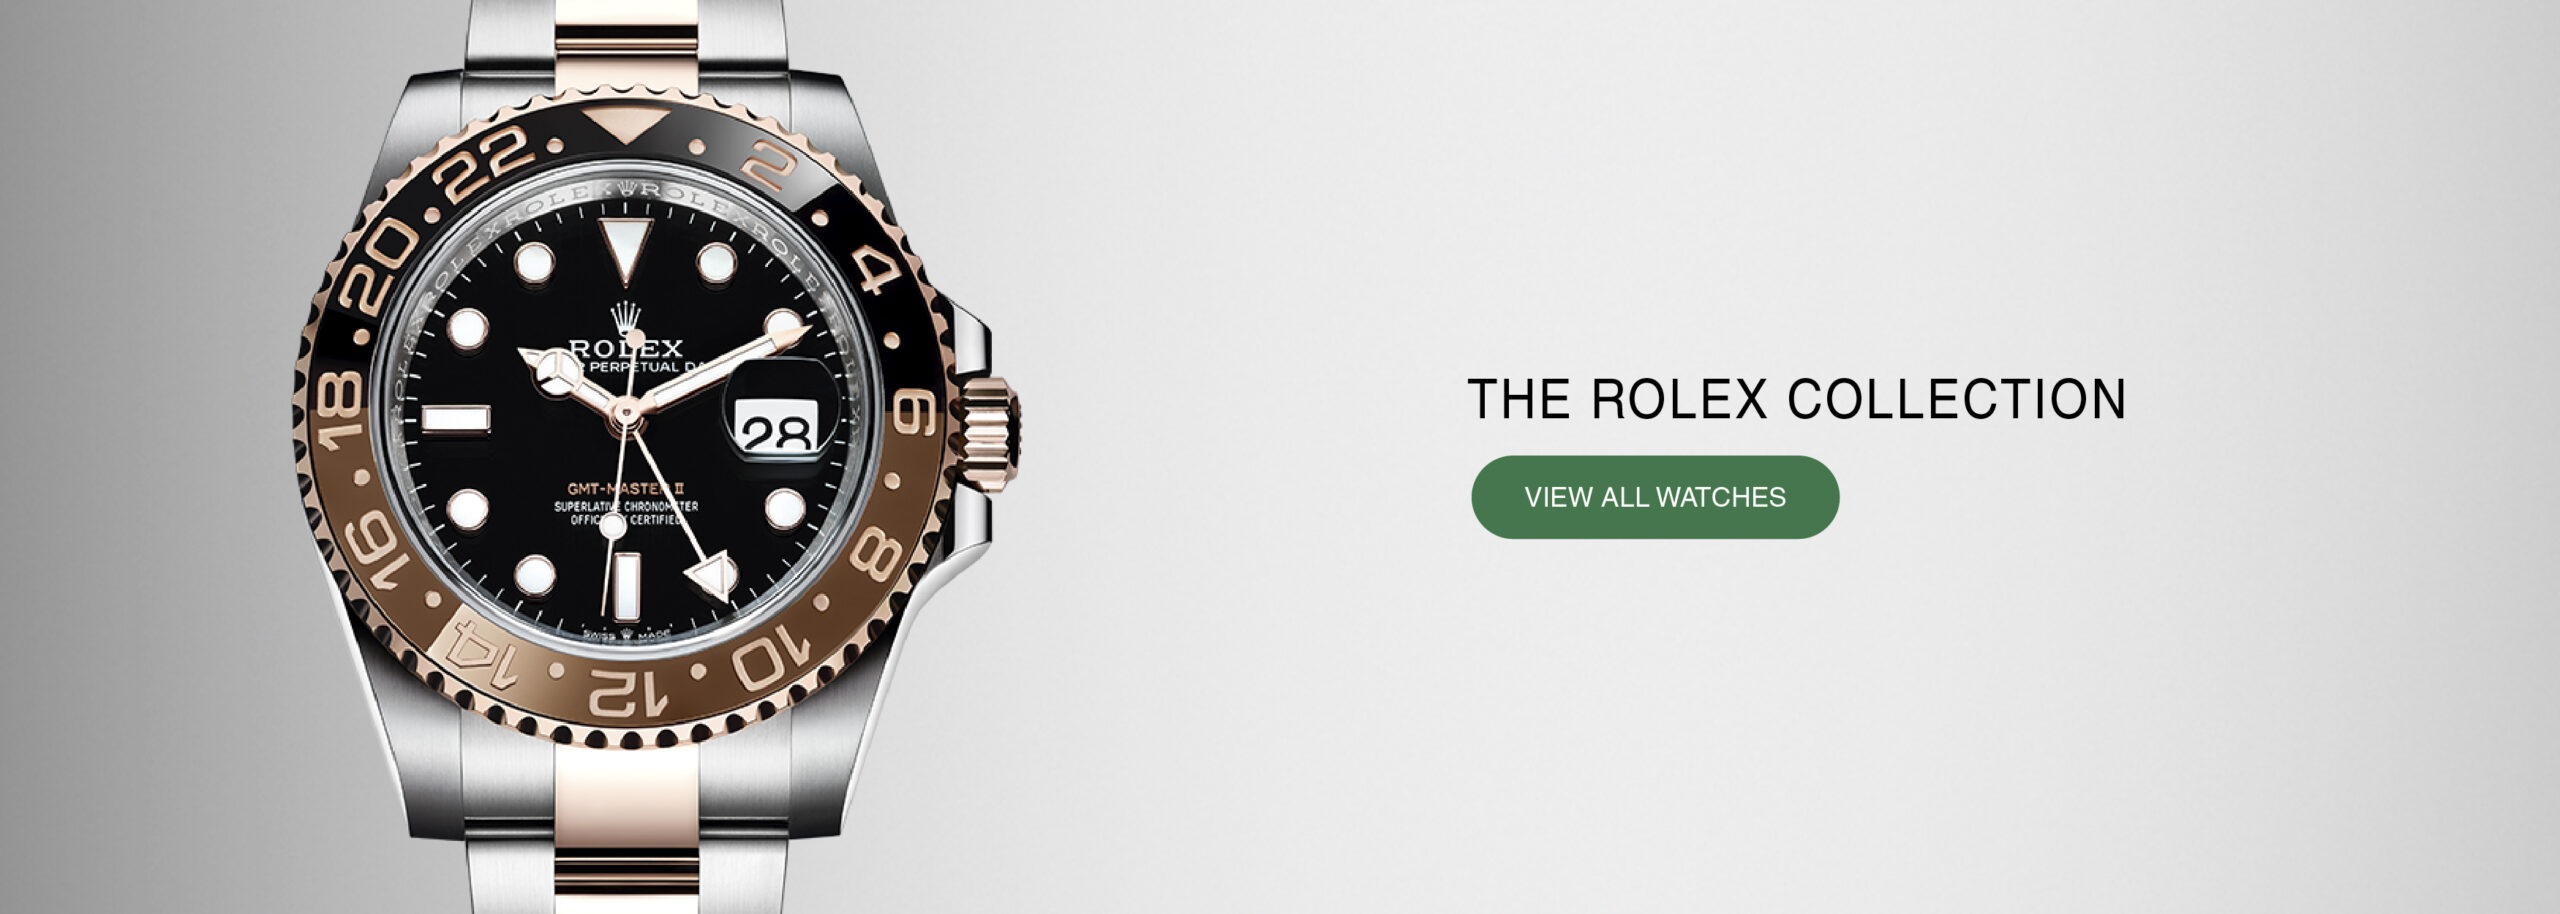 THE ROLEX COLLECTION